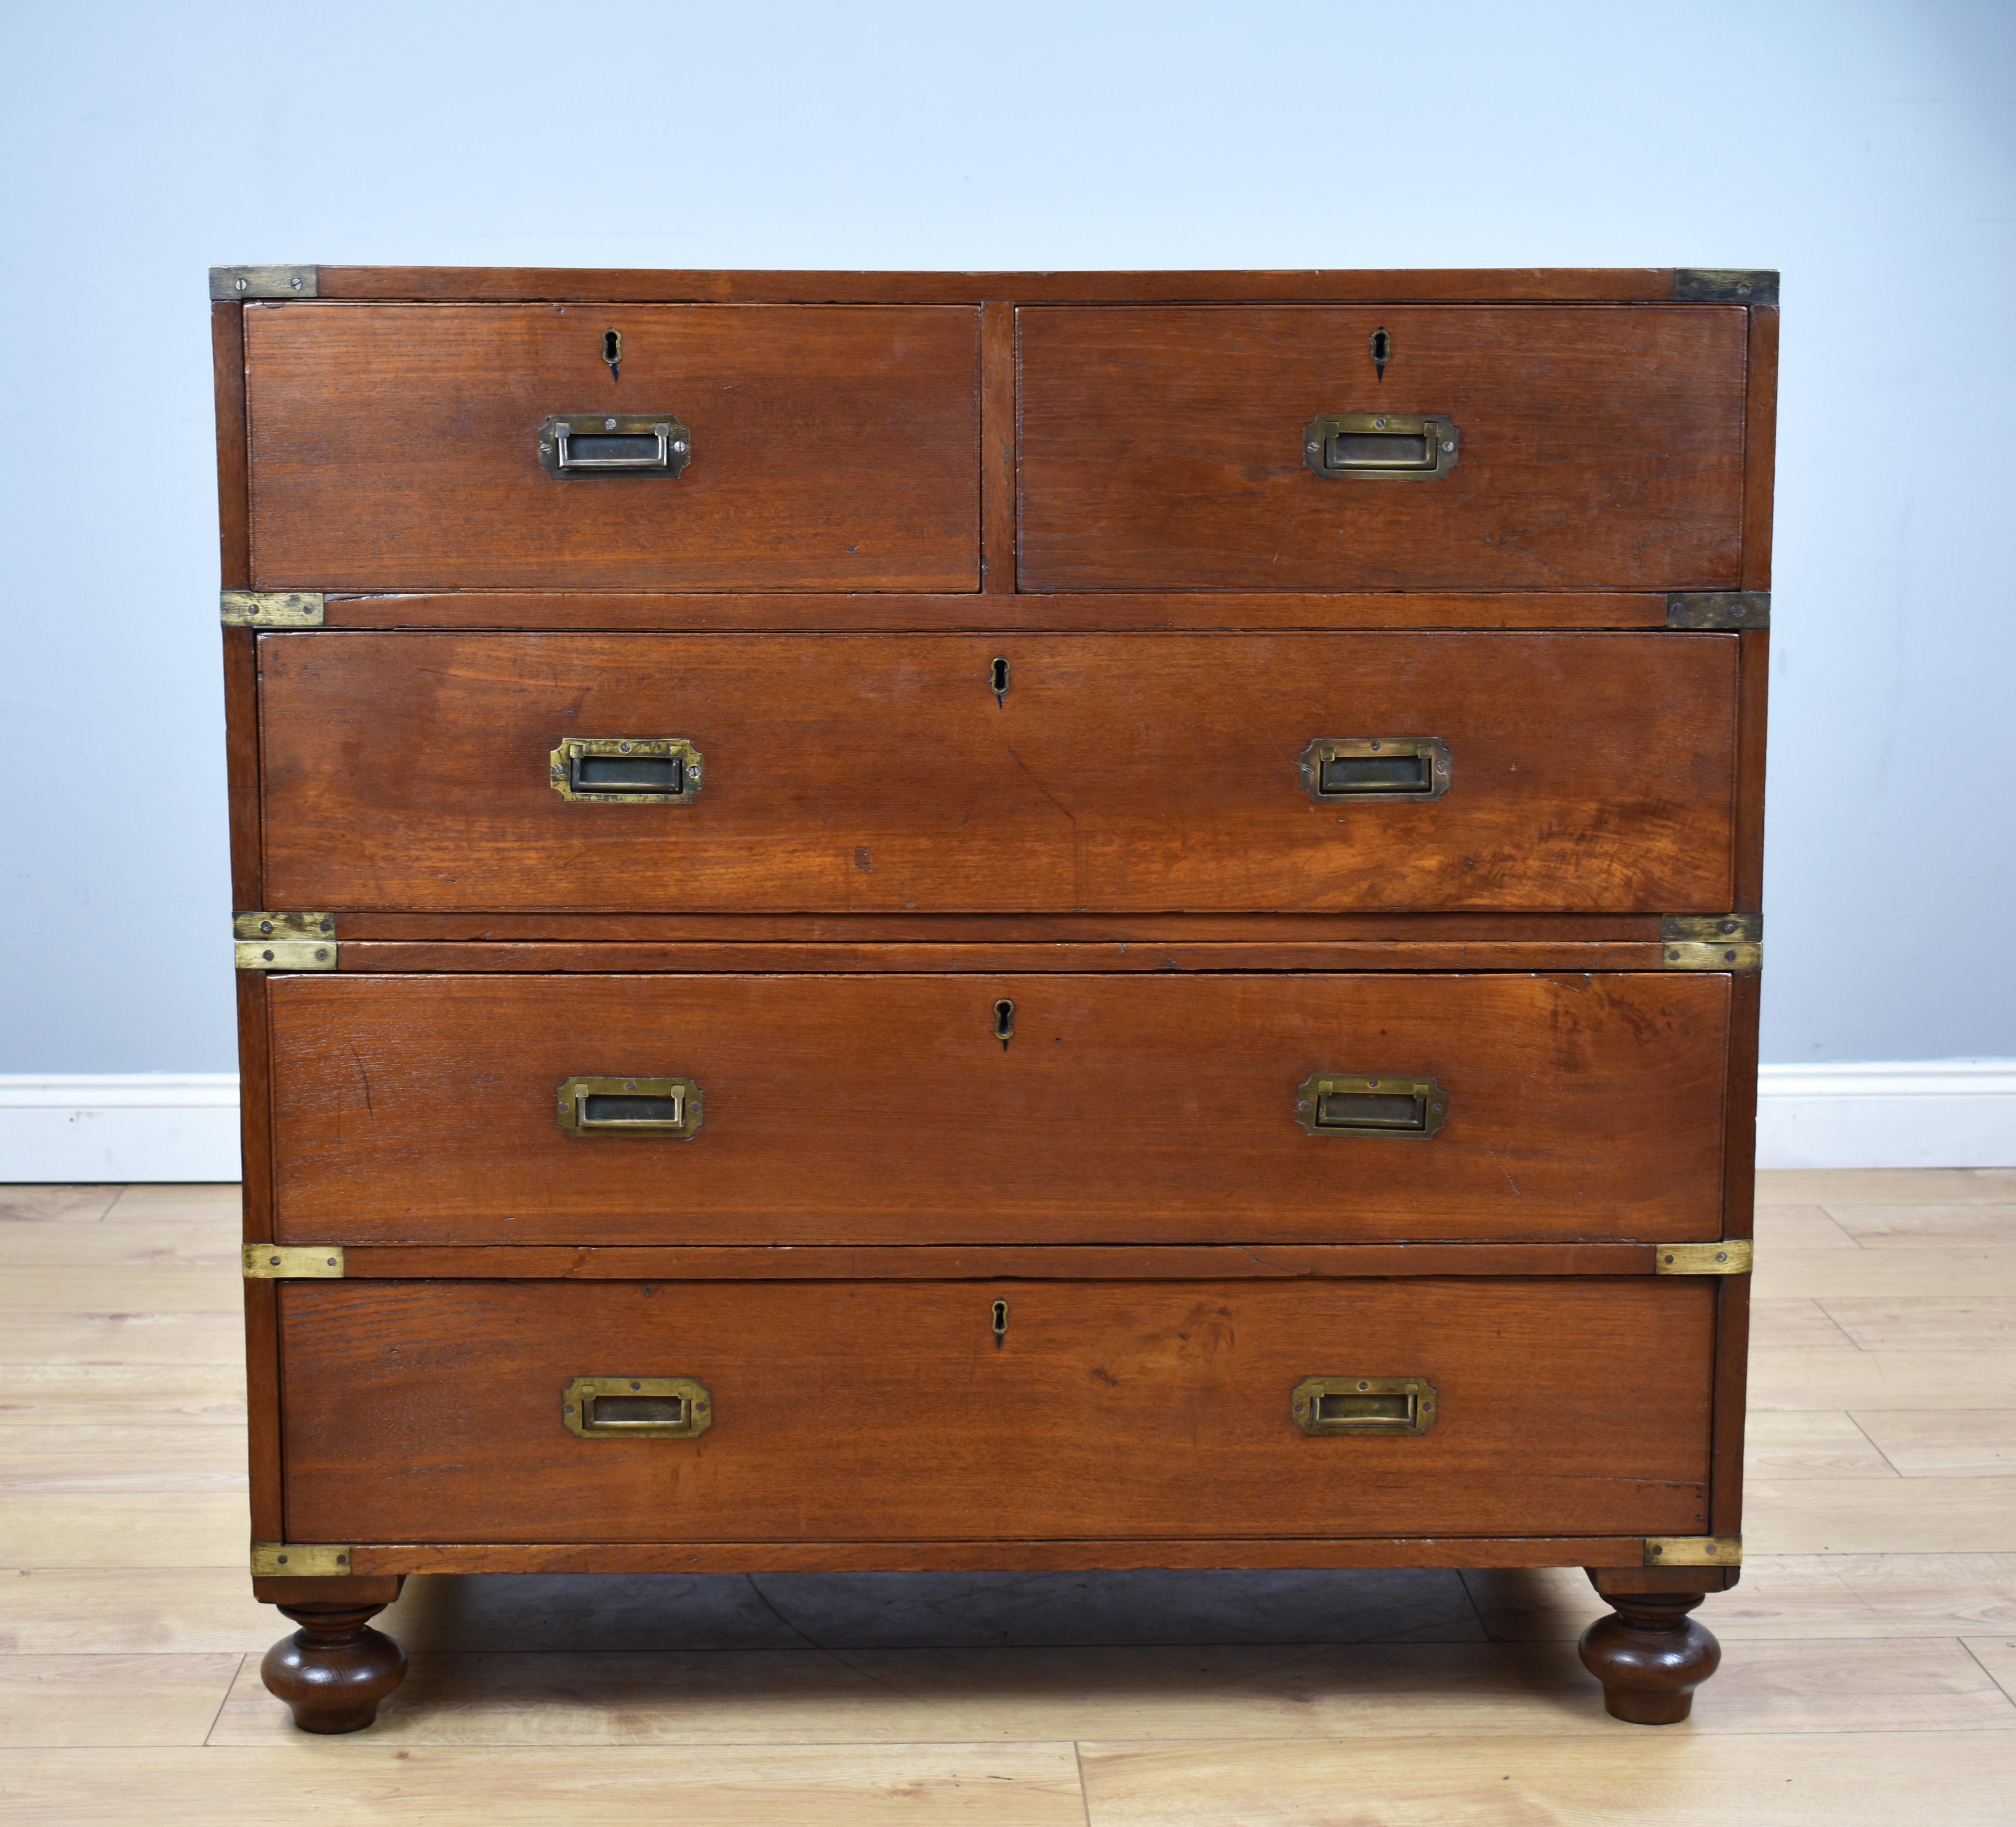 For sale is a good quality George III Campaign chest, having brass corners and original iron handles to each end of each section, with an arrangement of five drawers, each with original handles, standing on original removable turned feet. The chest